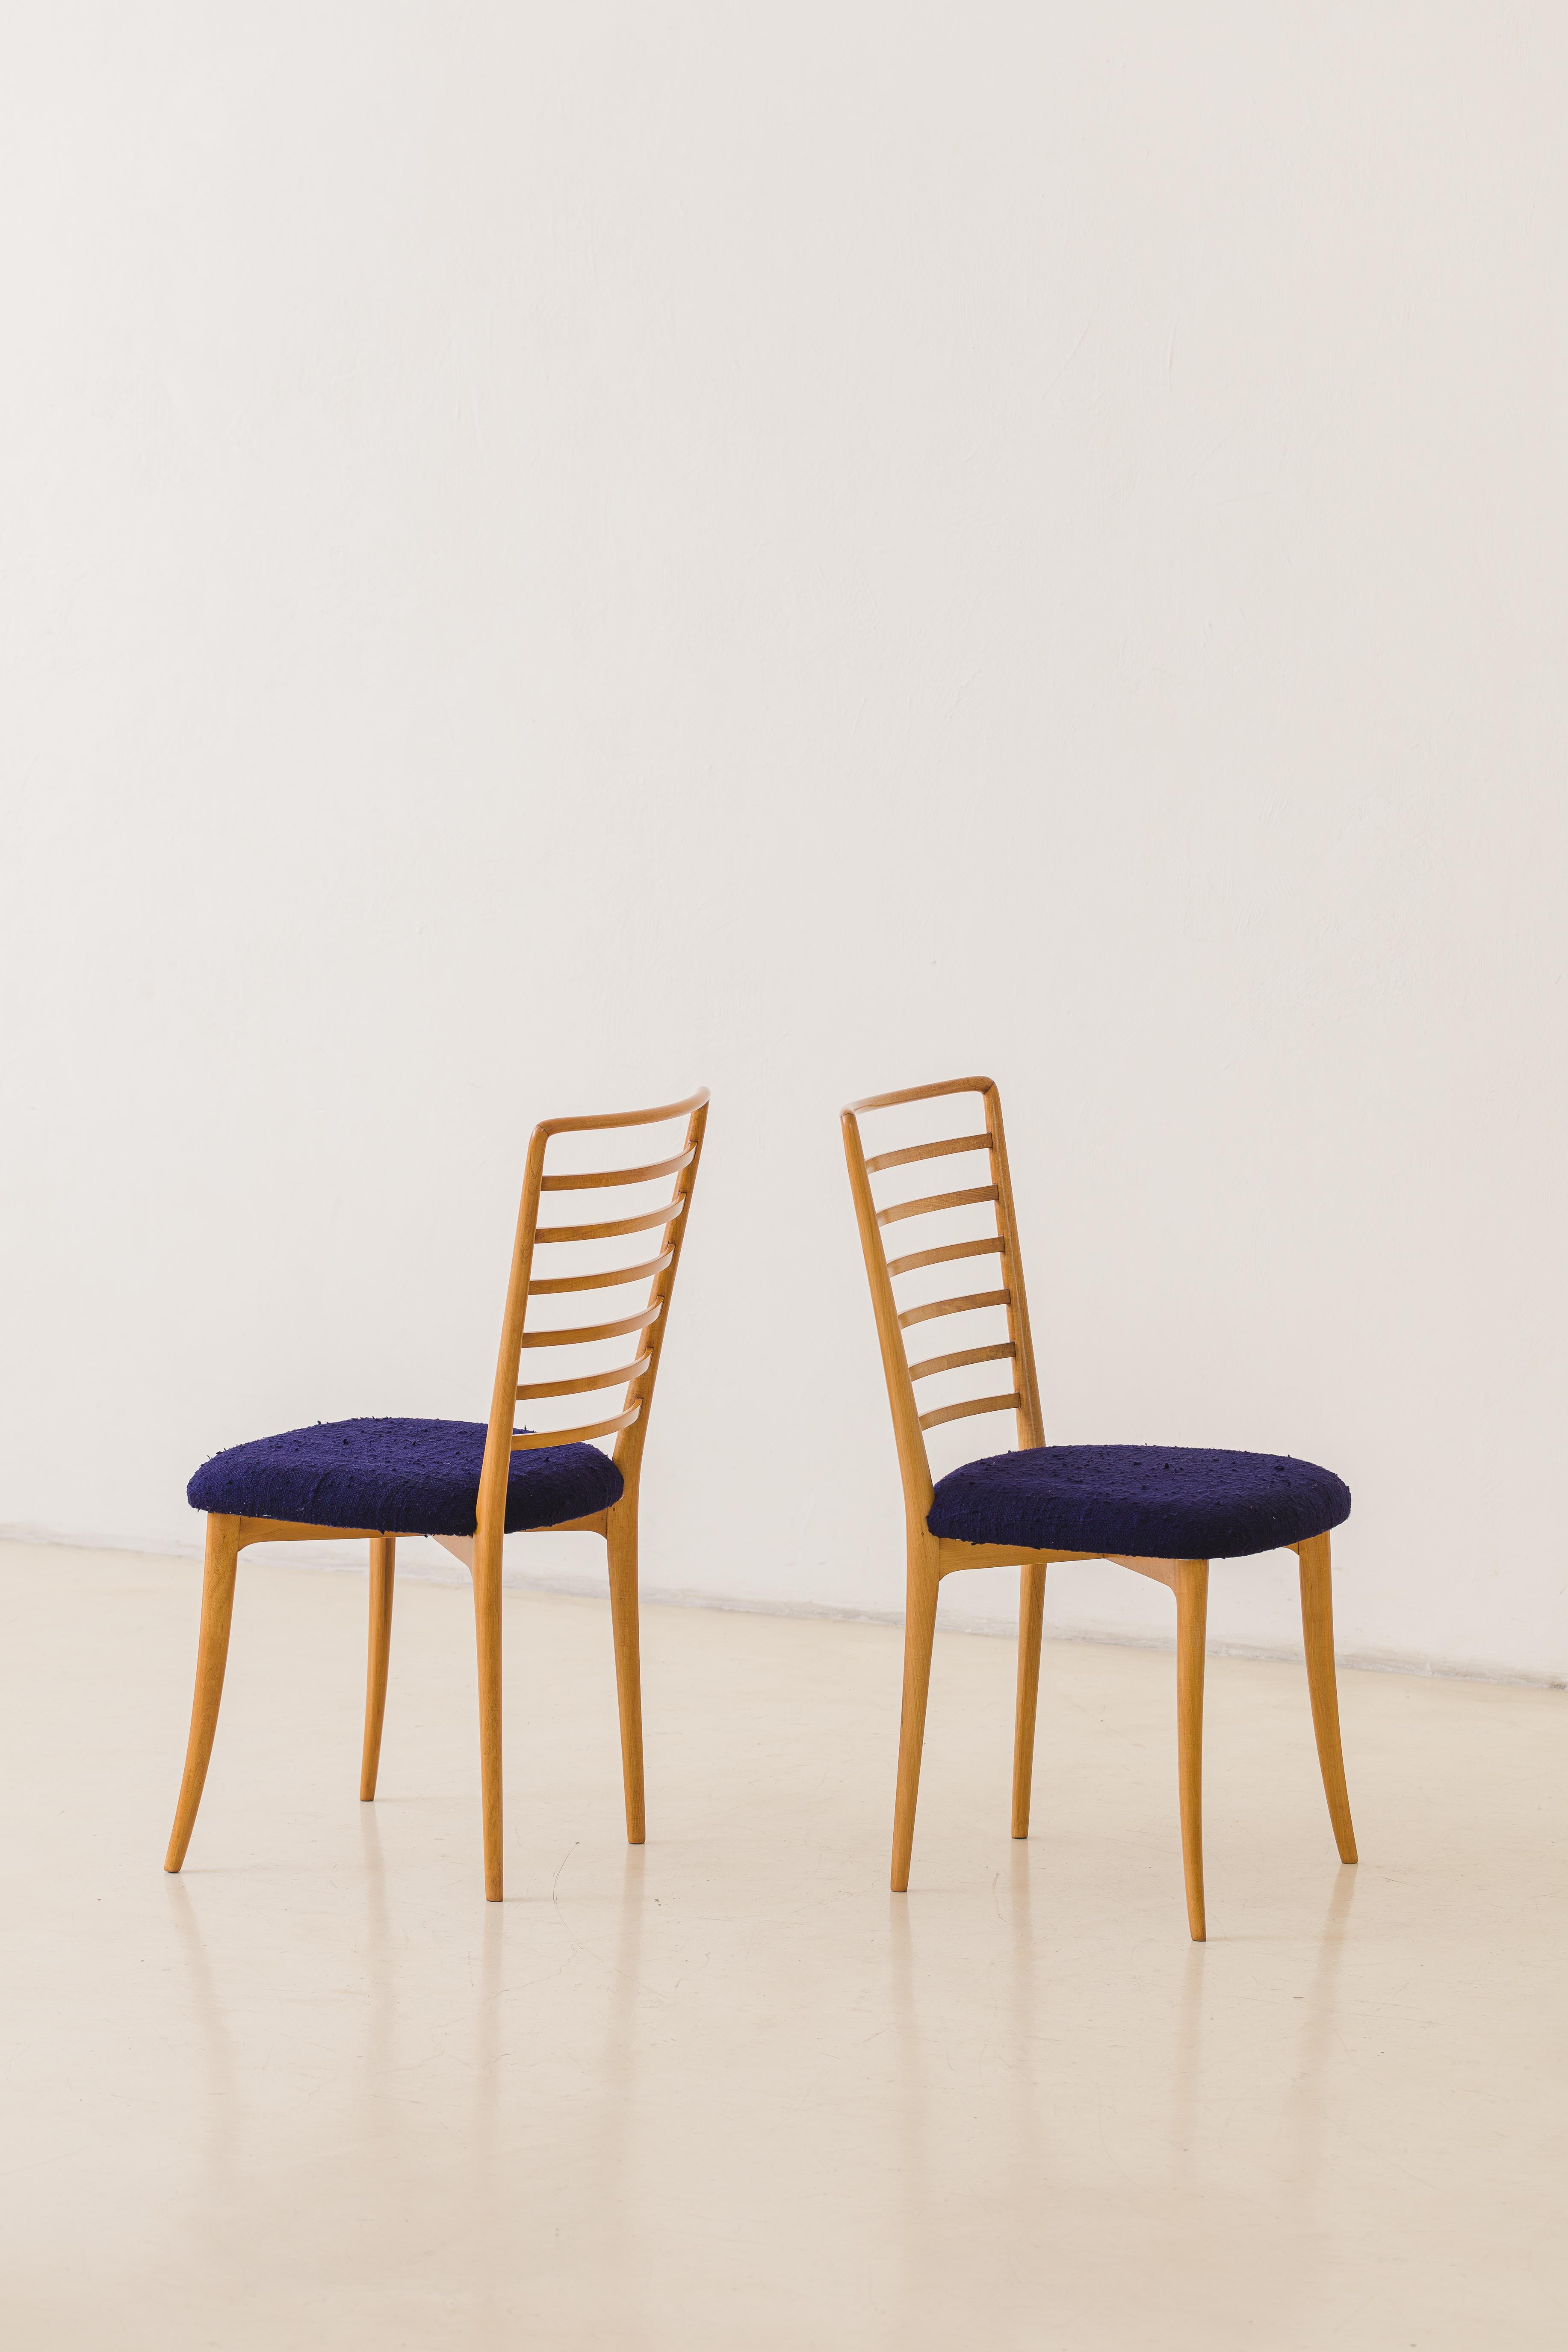 Brazilian Joaquim Tenreiro Dining Chairs, Solid Wood and Fabric, MidCentury, Brazil, 1950s For Sale